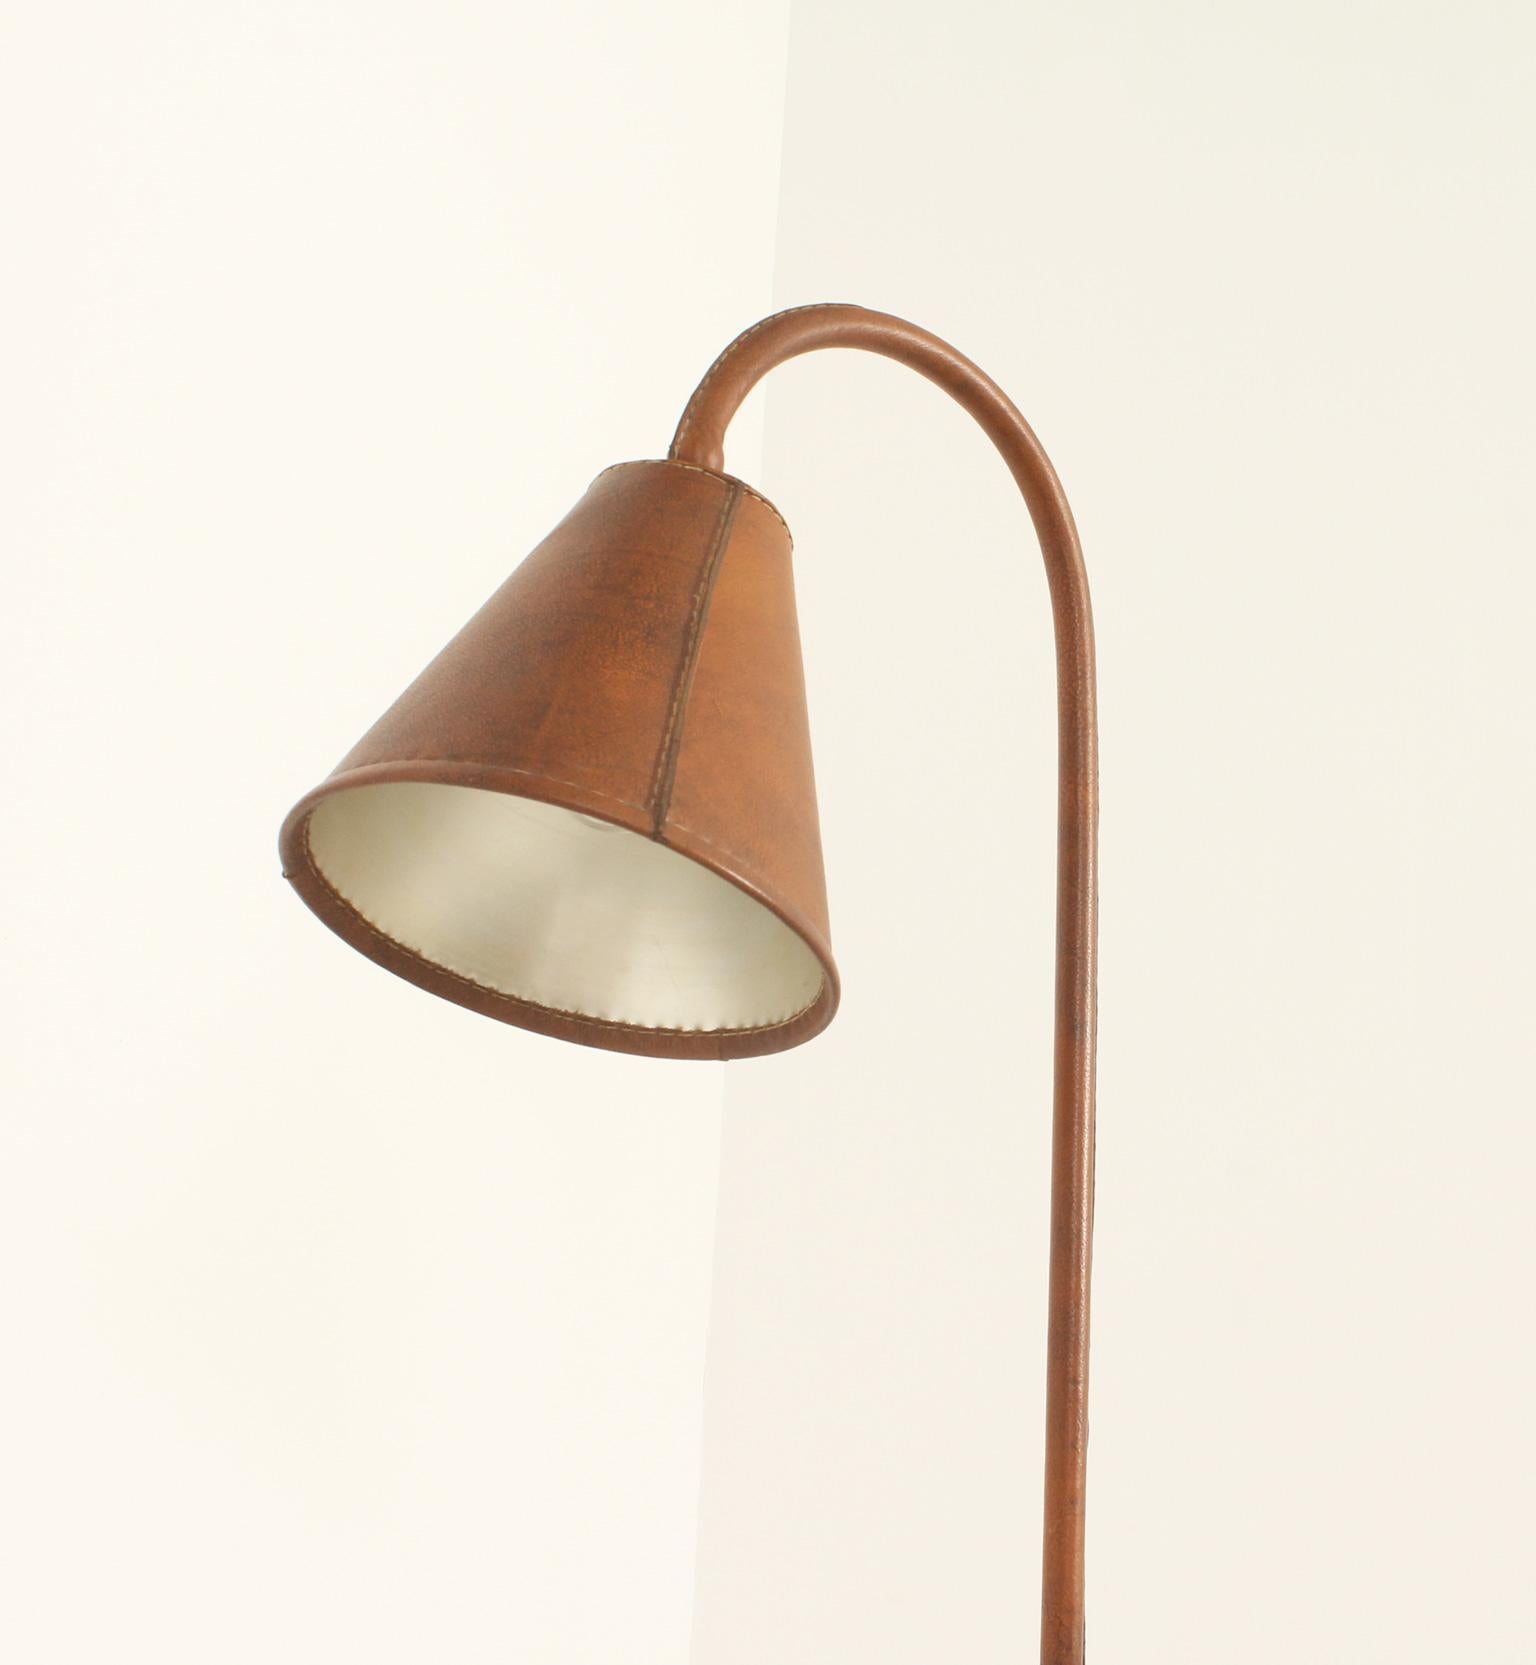 Mid-Century Modern Floor Lamp by Valenti in Brown Leather, Spain, 1950's For Sale